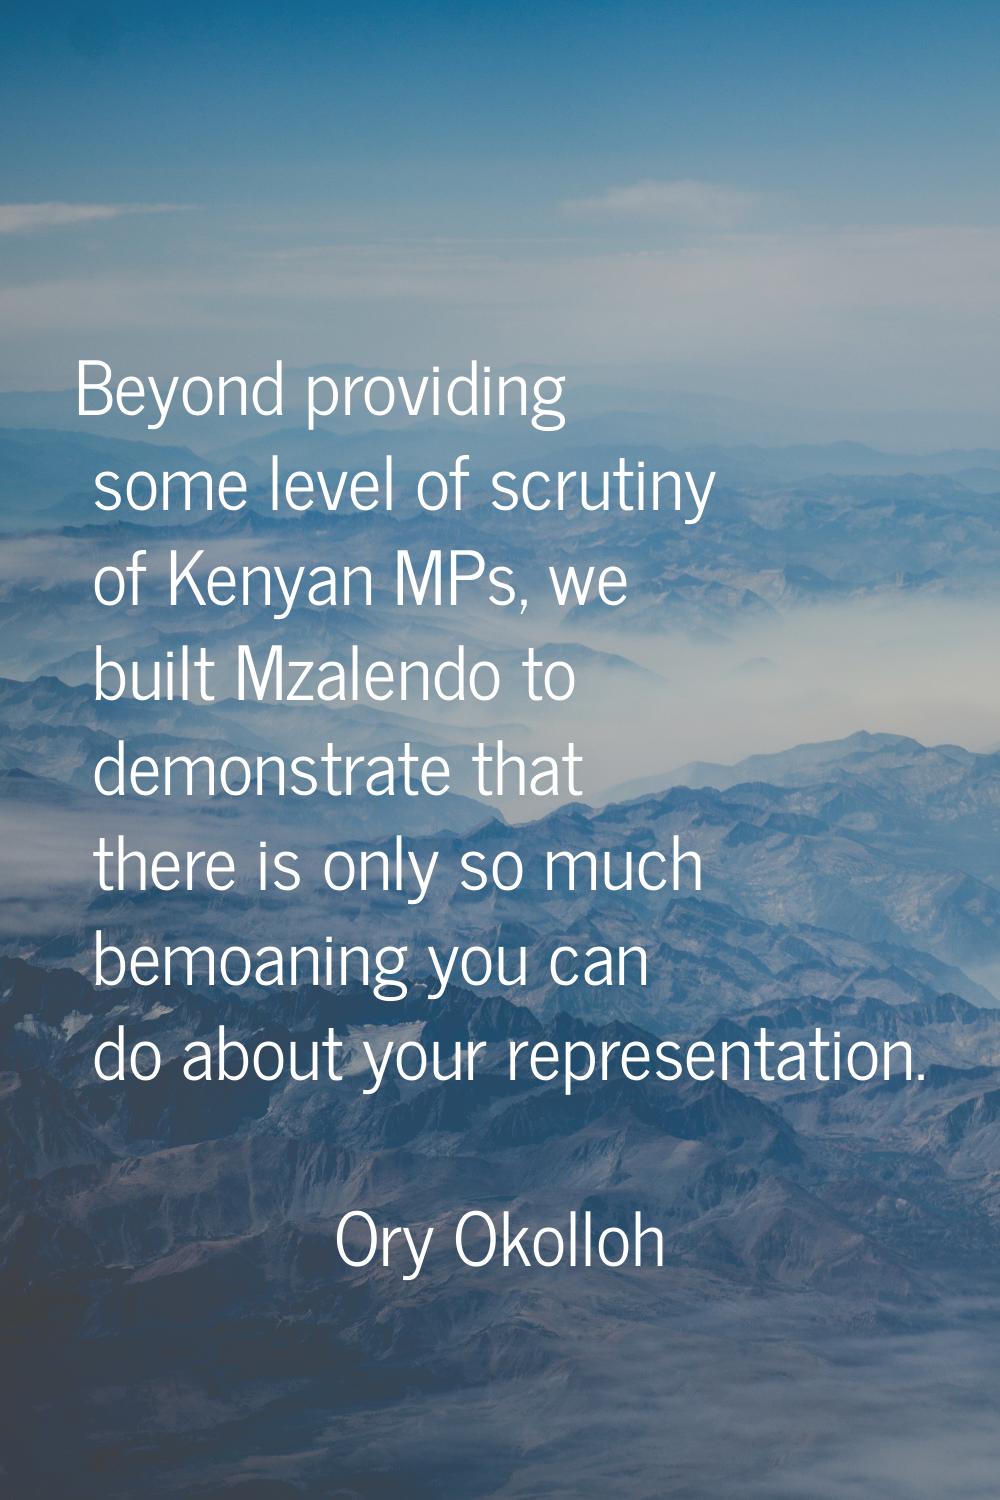 Beyond providing some level of scrutiny of Kenyan MPs, we built Mzalendo to demonstrate that there 